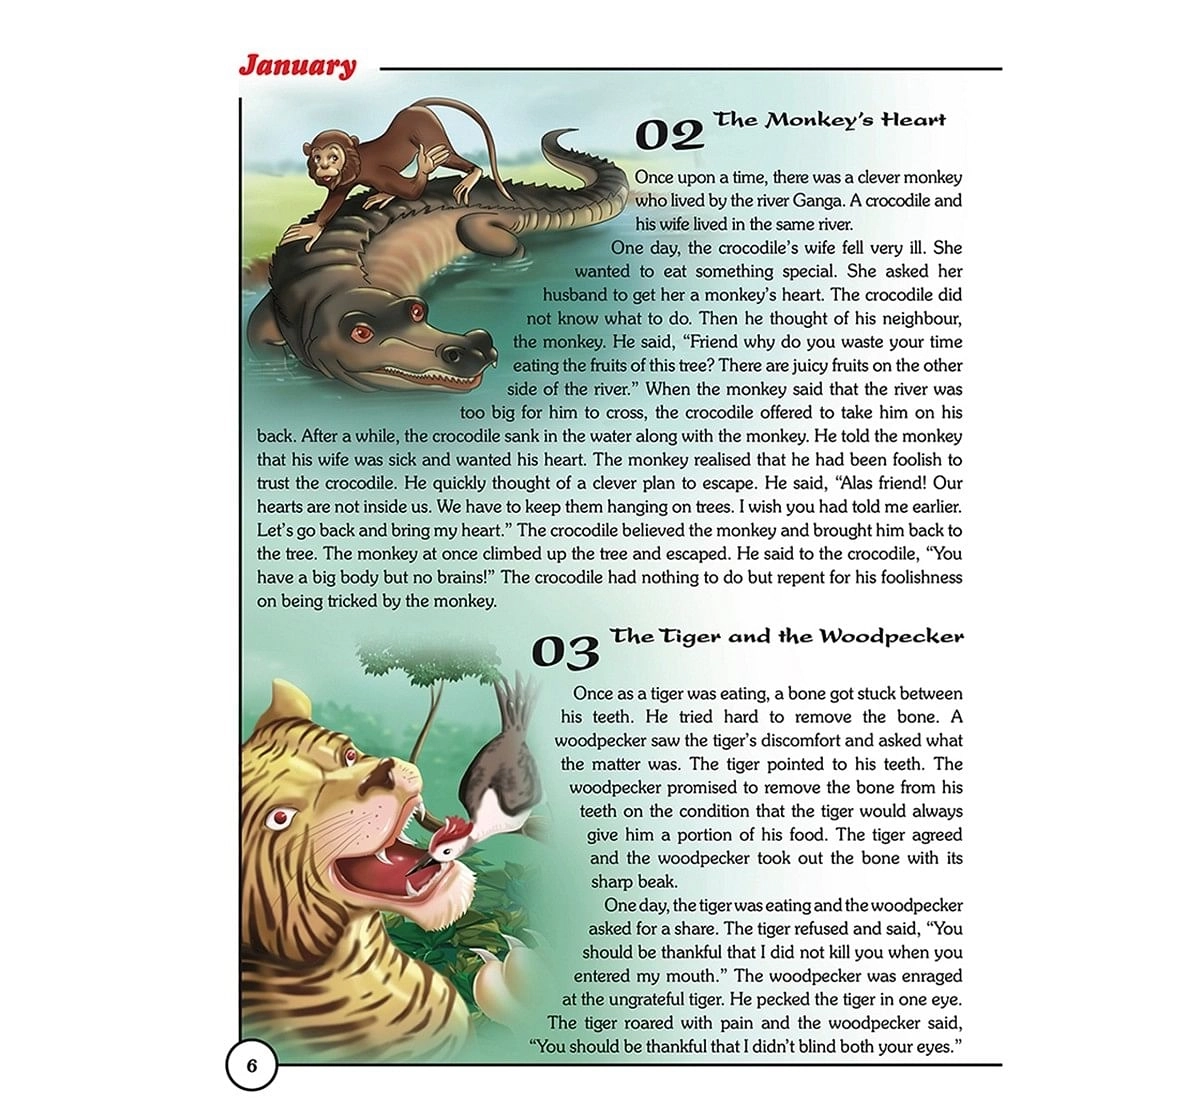 Om Books: 365 Animal Tales, 236 Pages, Hardcover